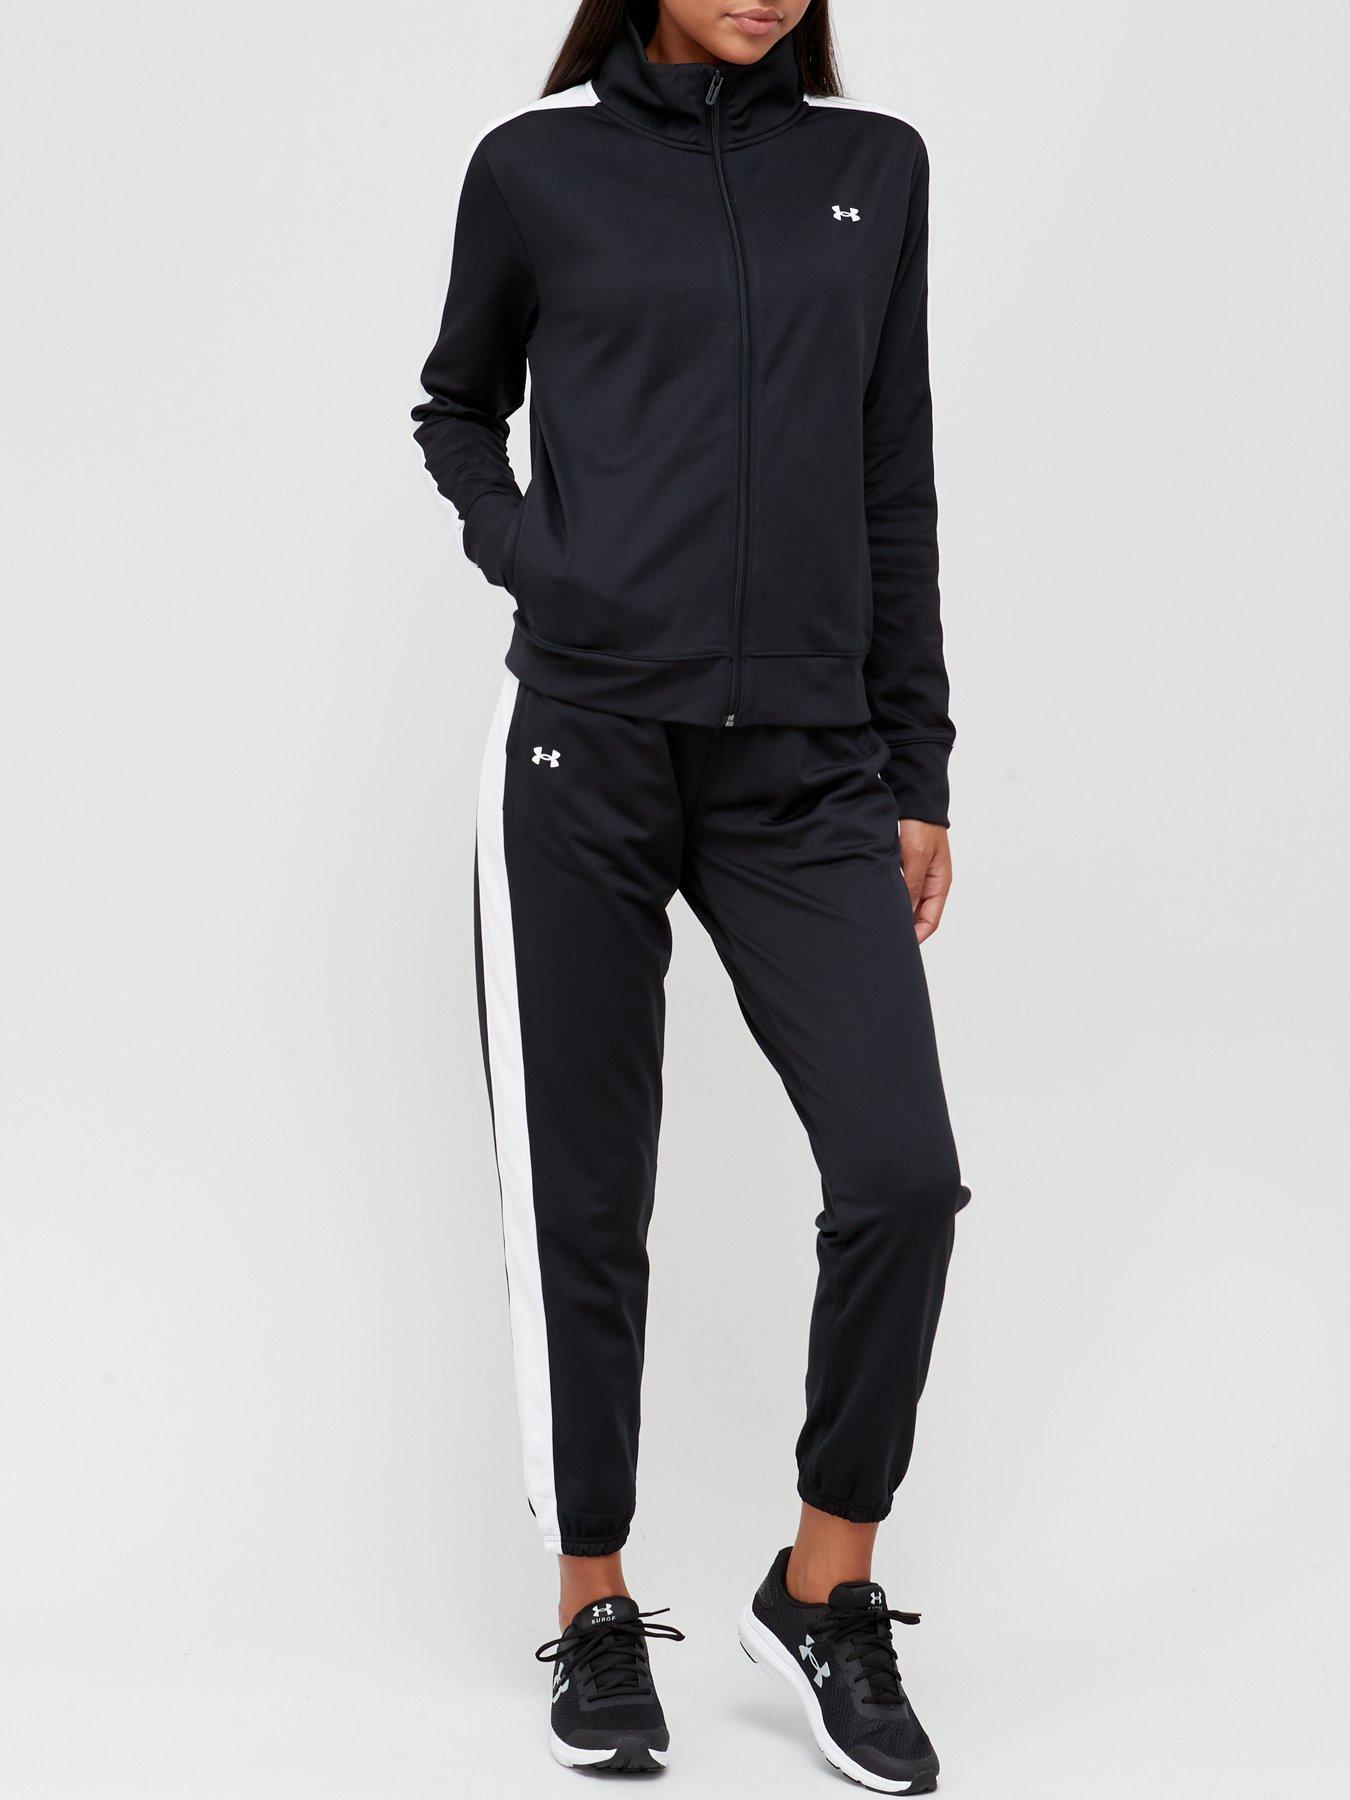 UNDER ARMOUR Women's Tricot Tracksuit - Black/White